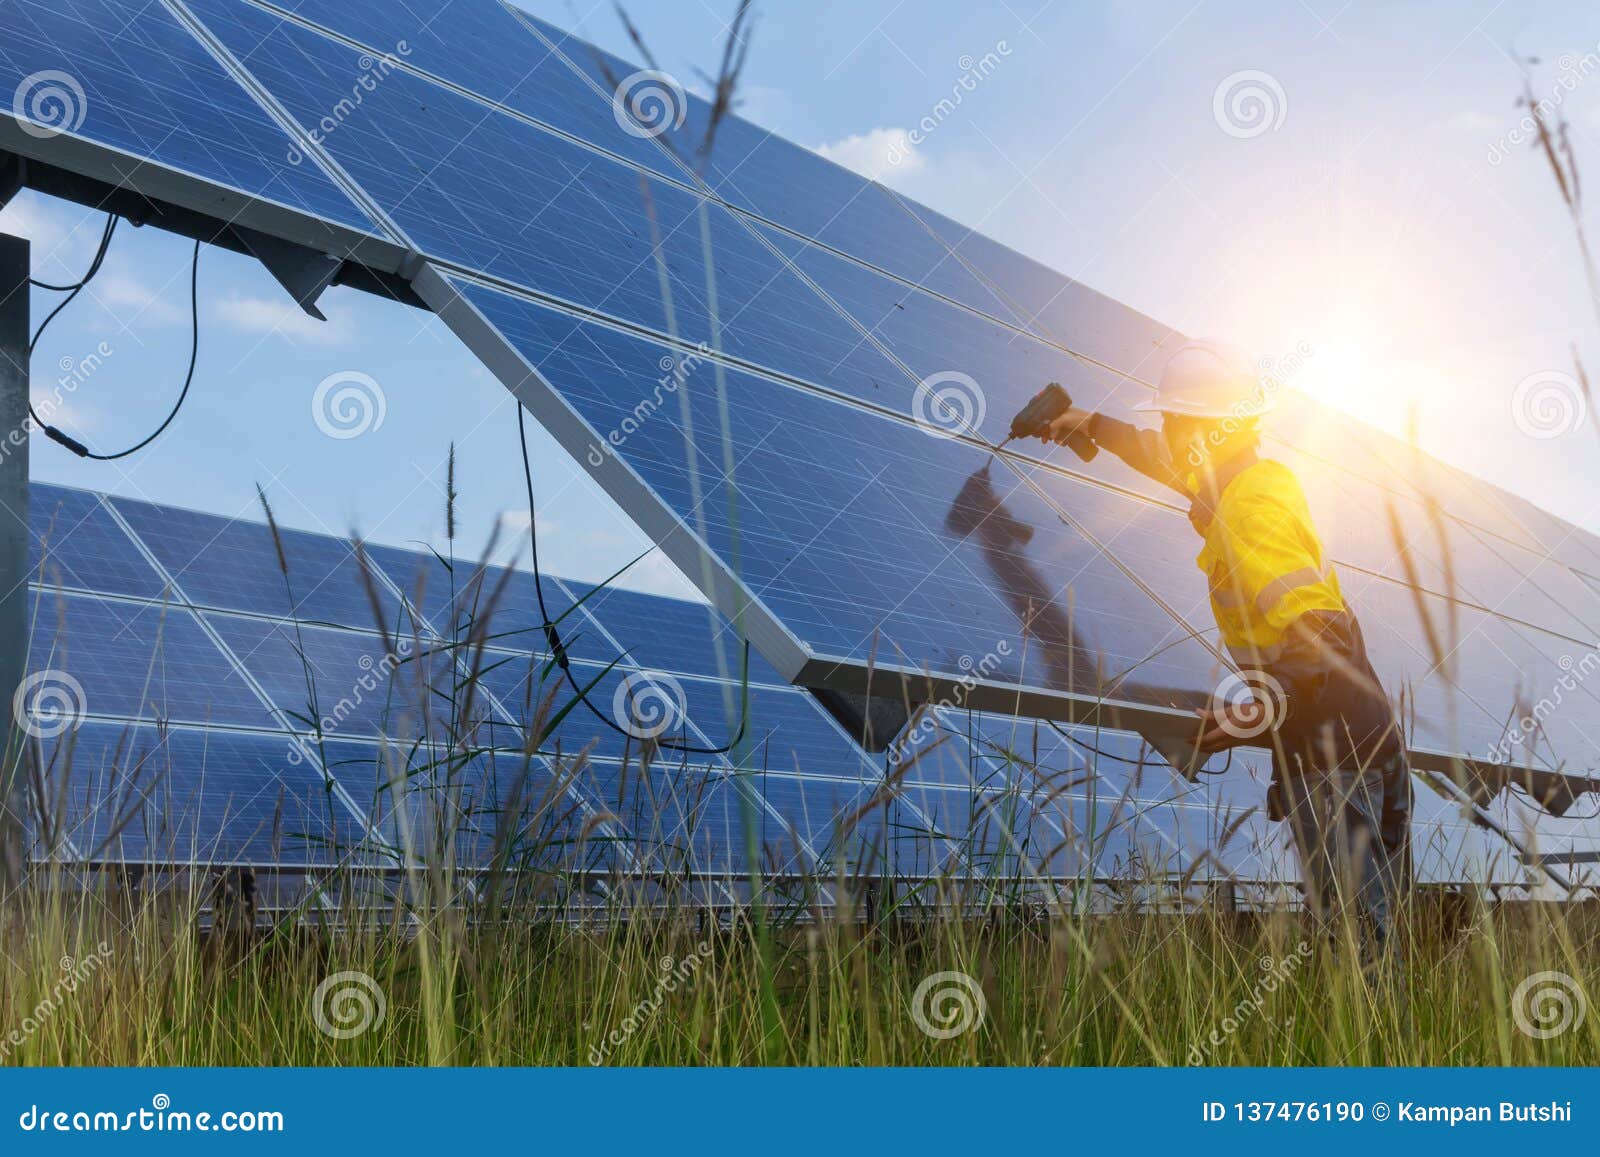 electrical and instrument technician use battery drill to maintenance electric system at solar panel field